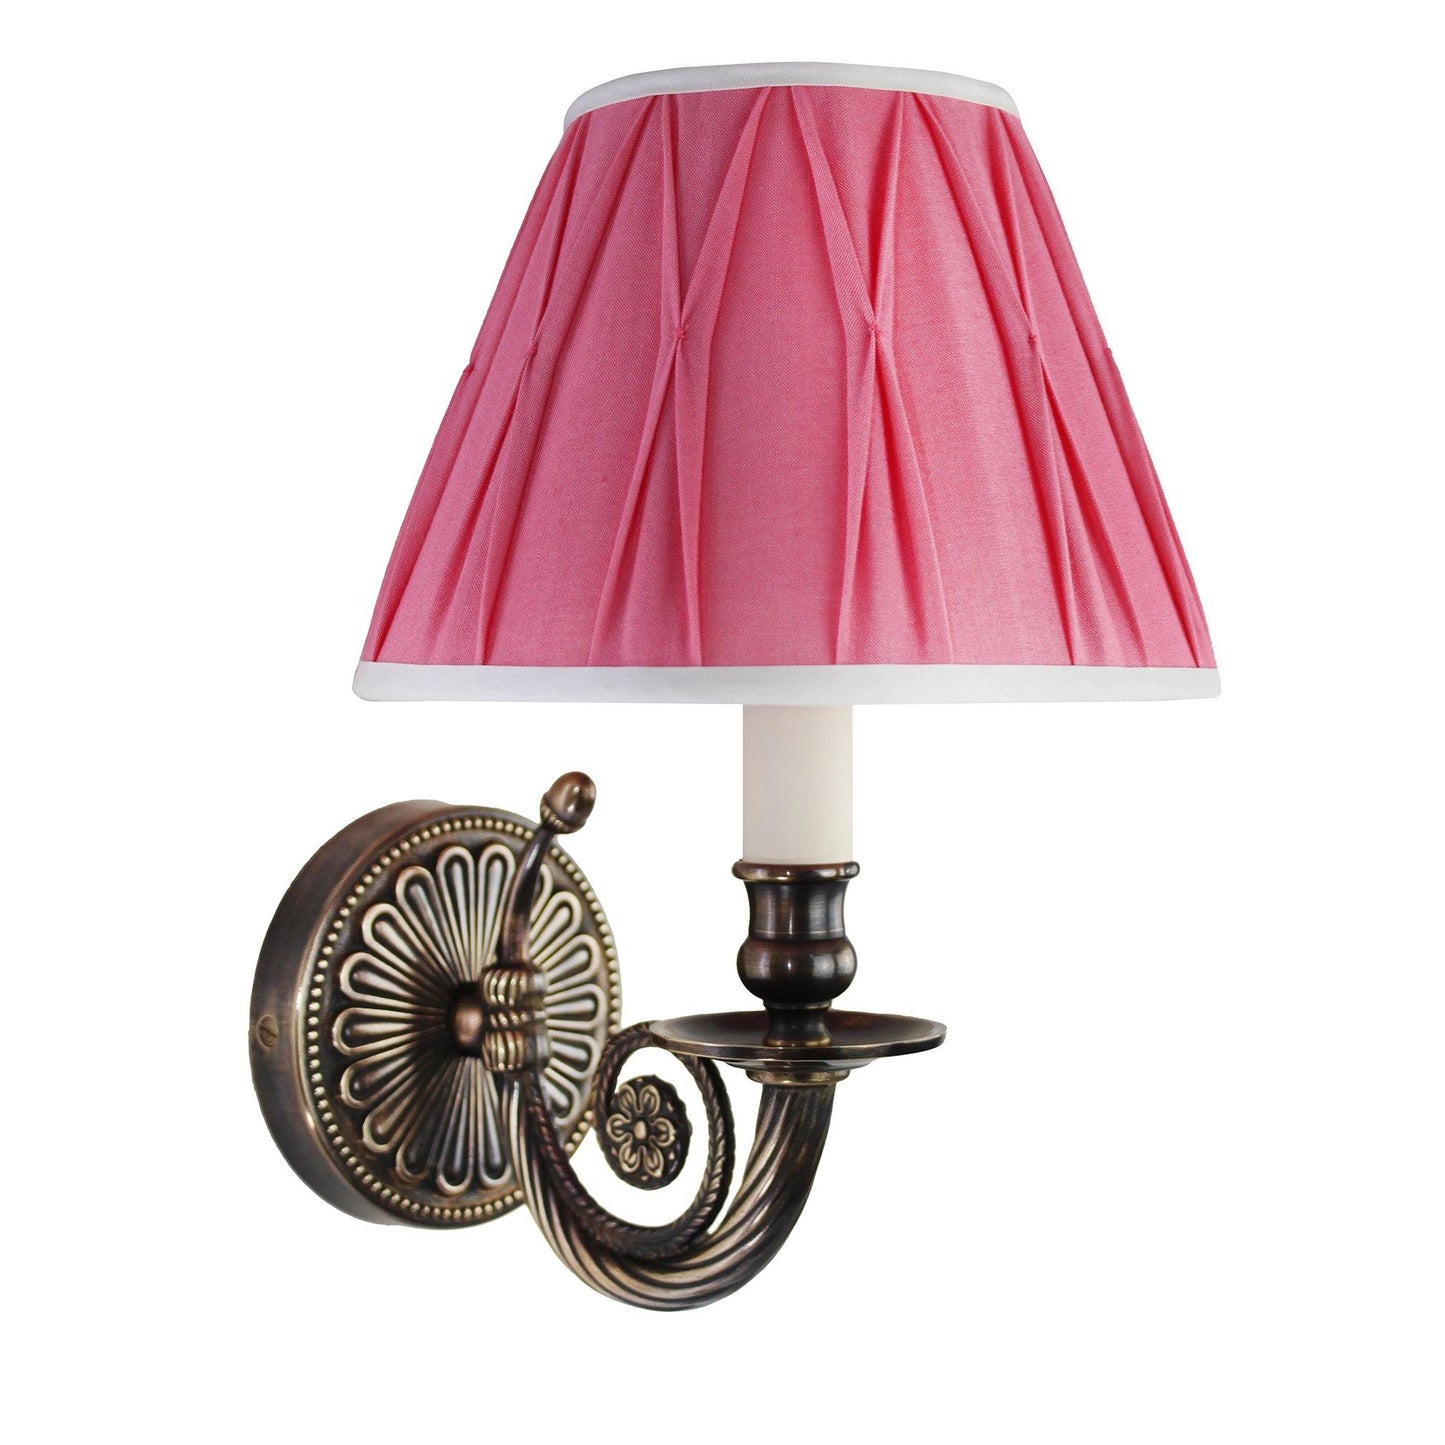 Imperial Wall Light - Aveoca